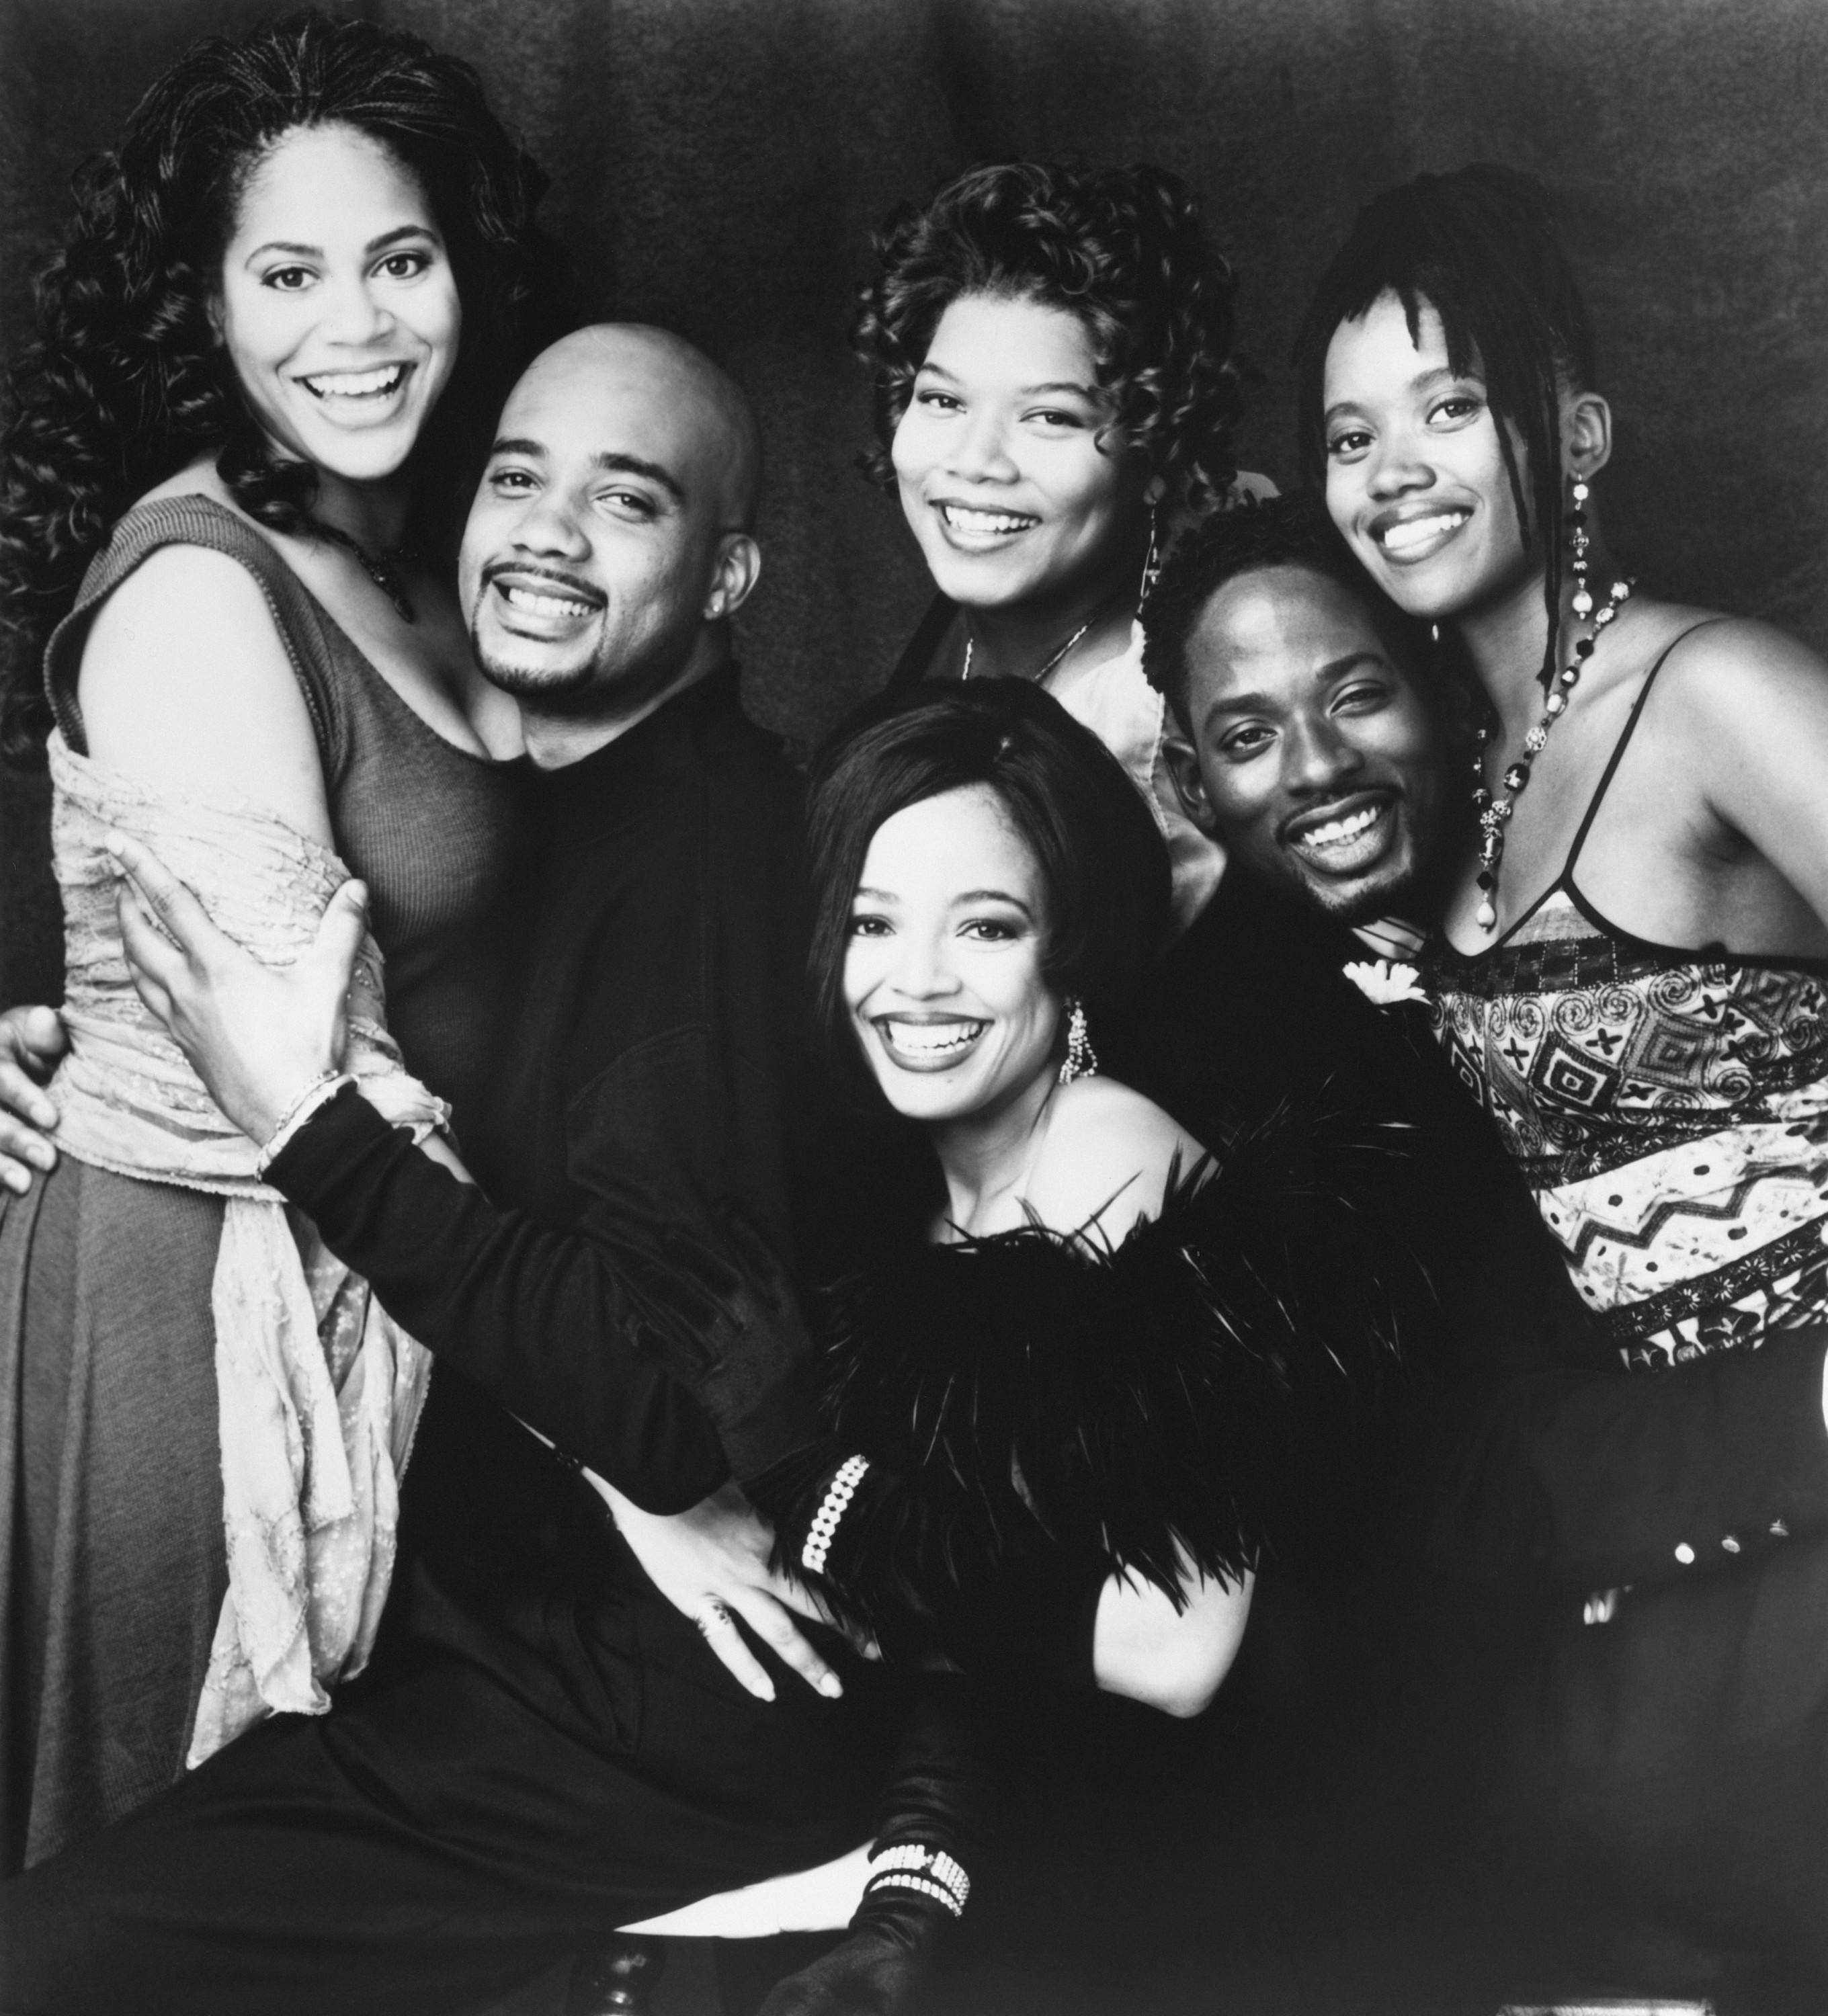 Group portrait of the &quot;Fresh Prince of Bel-Air&quot; cast smiling